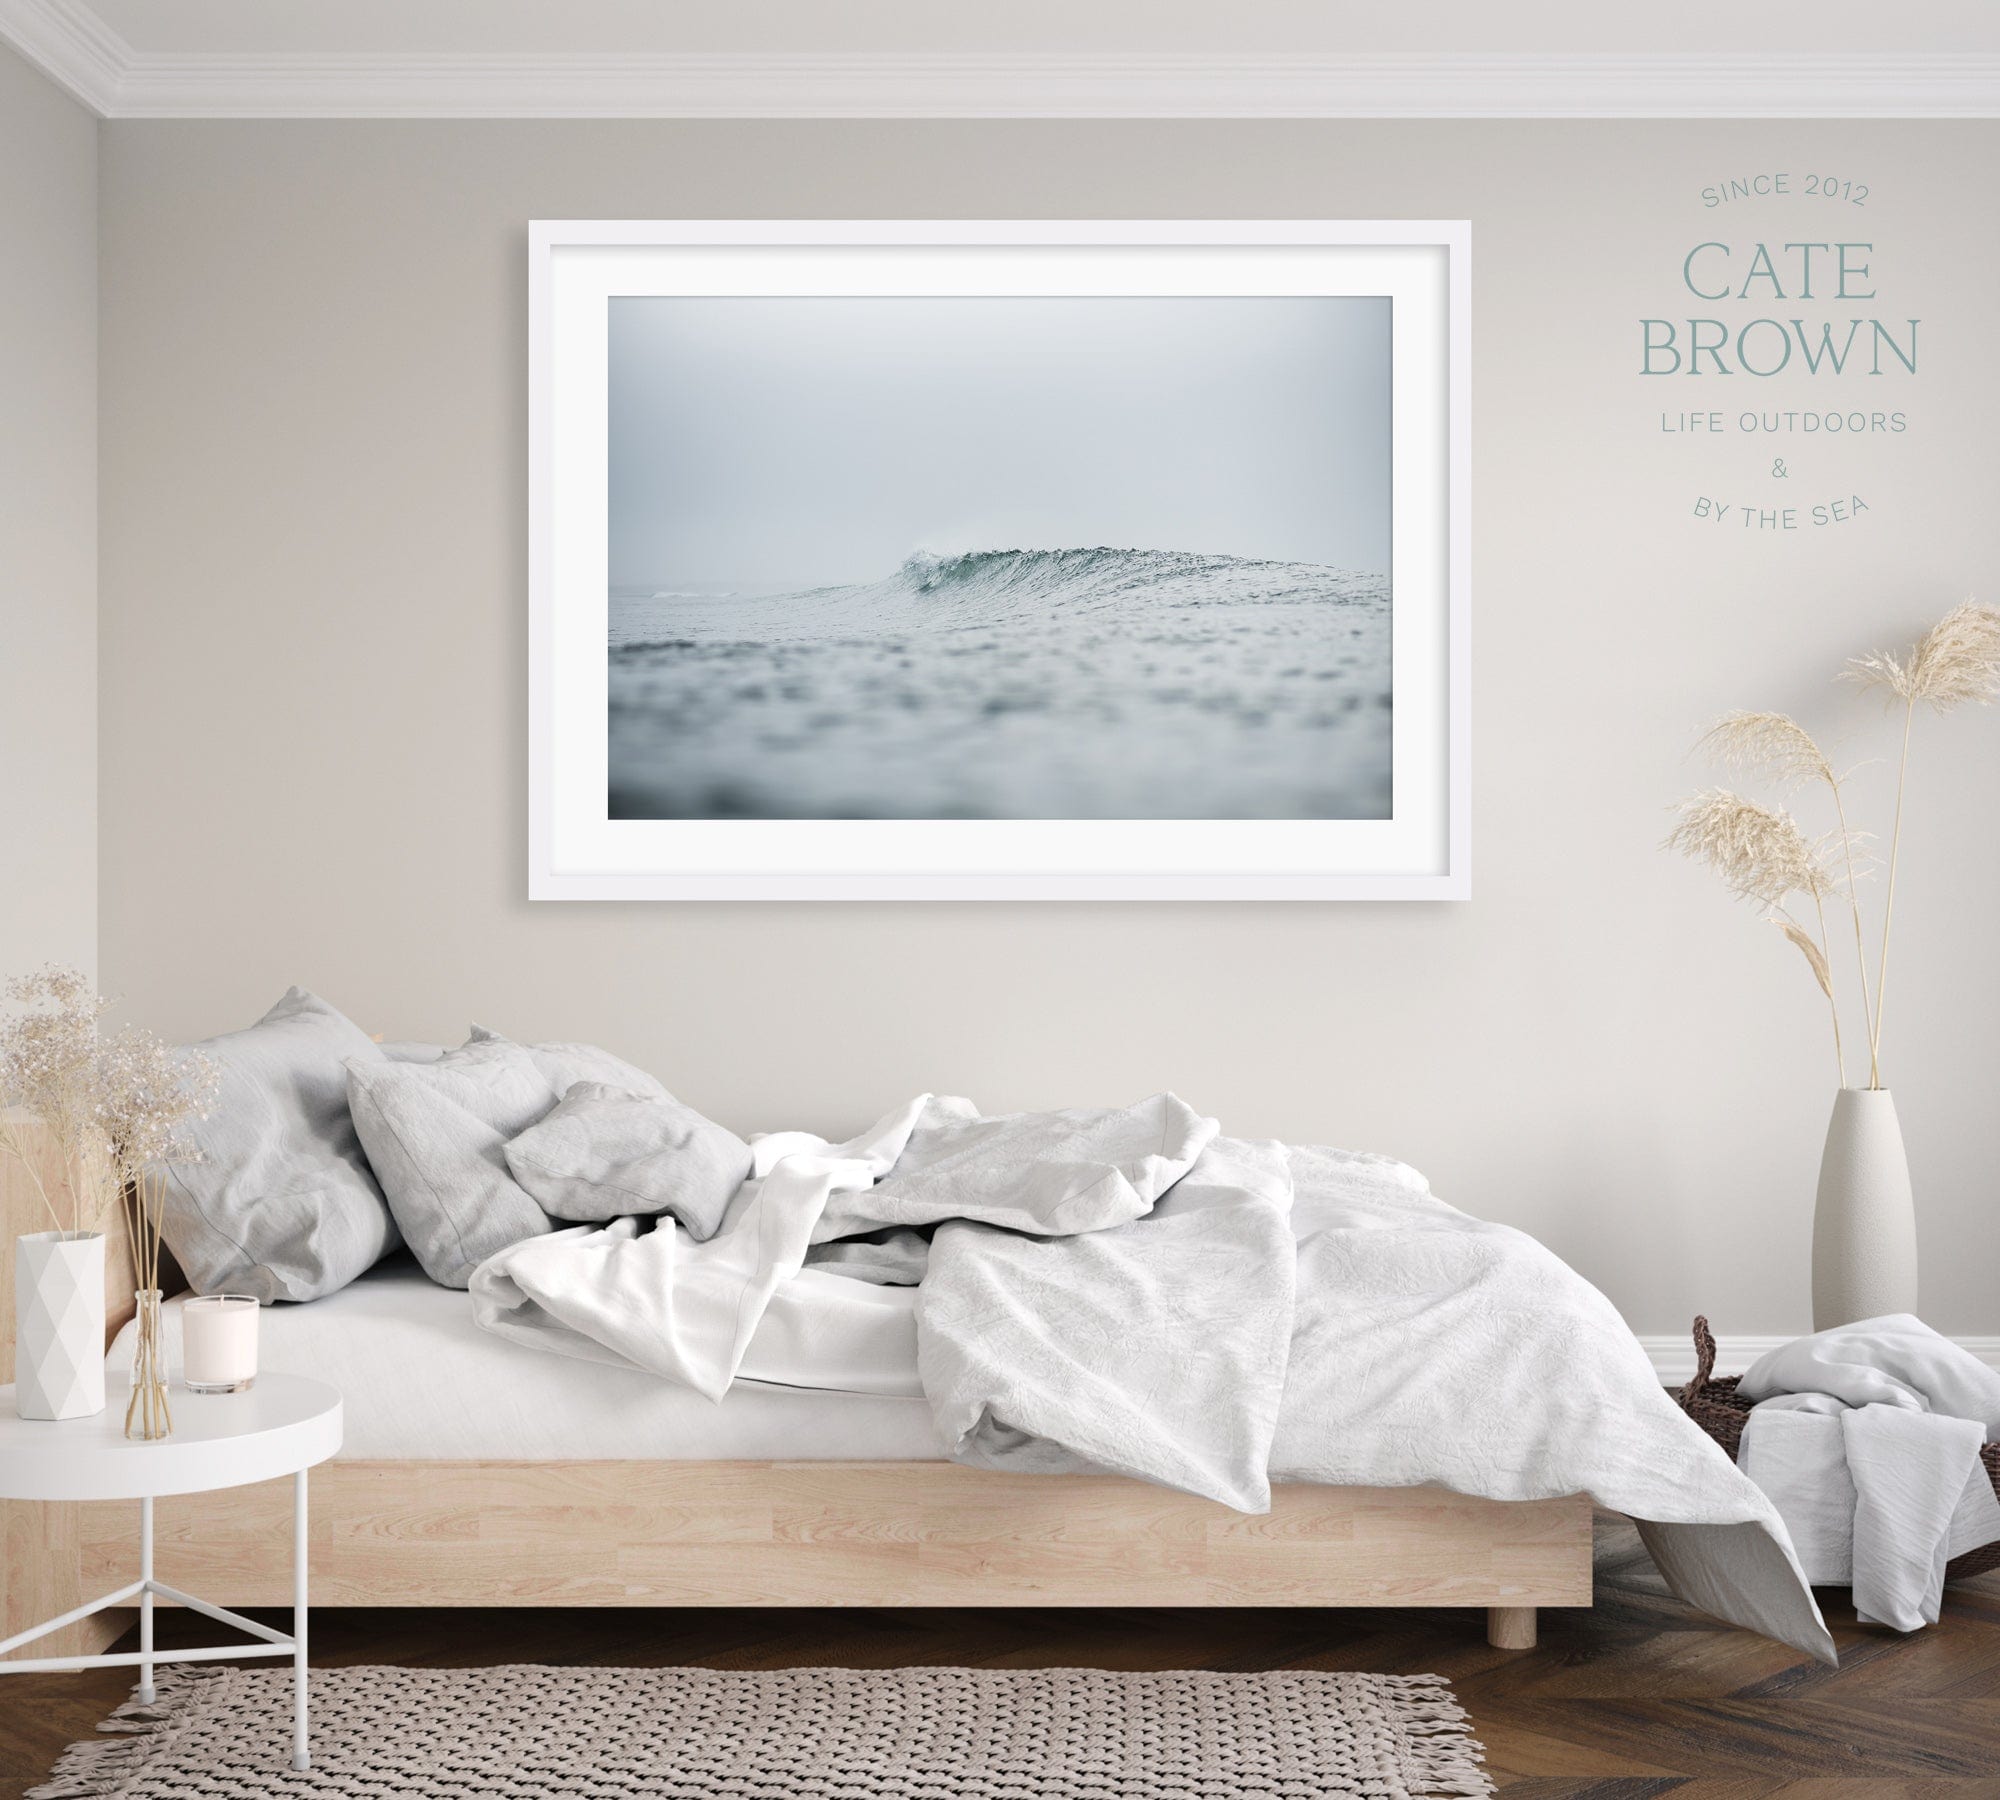 Cate Brown Photo Fine Art Print / 8"x12" / None (Print Only) Waves in Spring Fog  //  Ocean Photography Made to Order Ocean Fine Art